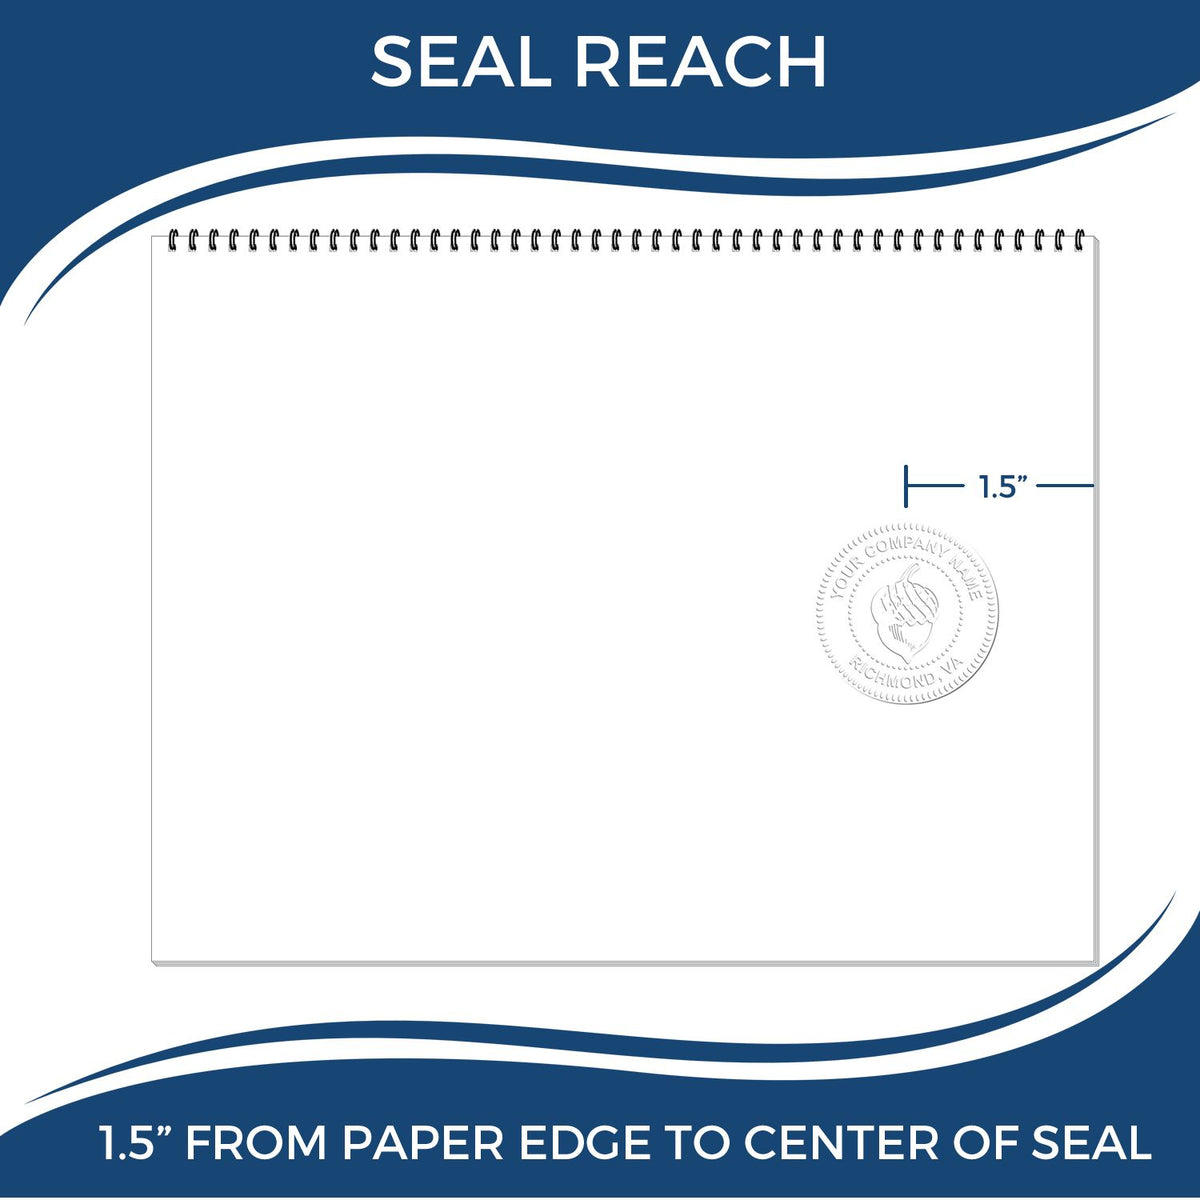 An infographic showing the seal reach which is represented by a ruler and a miniature seal image of the Gift Florida Engineer Seal